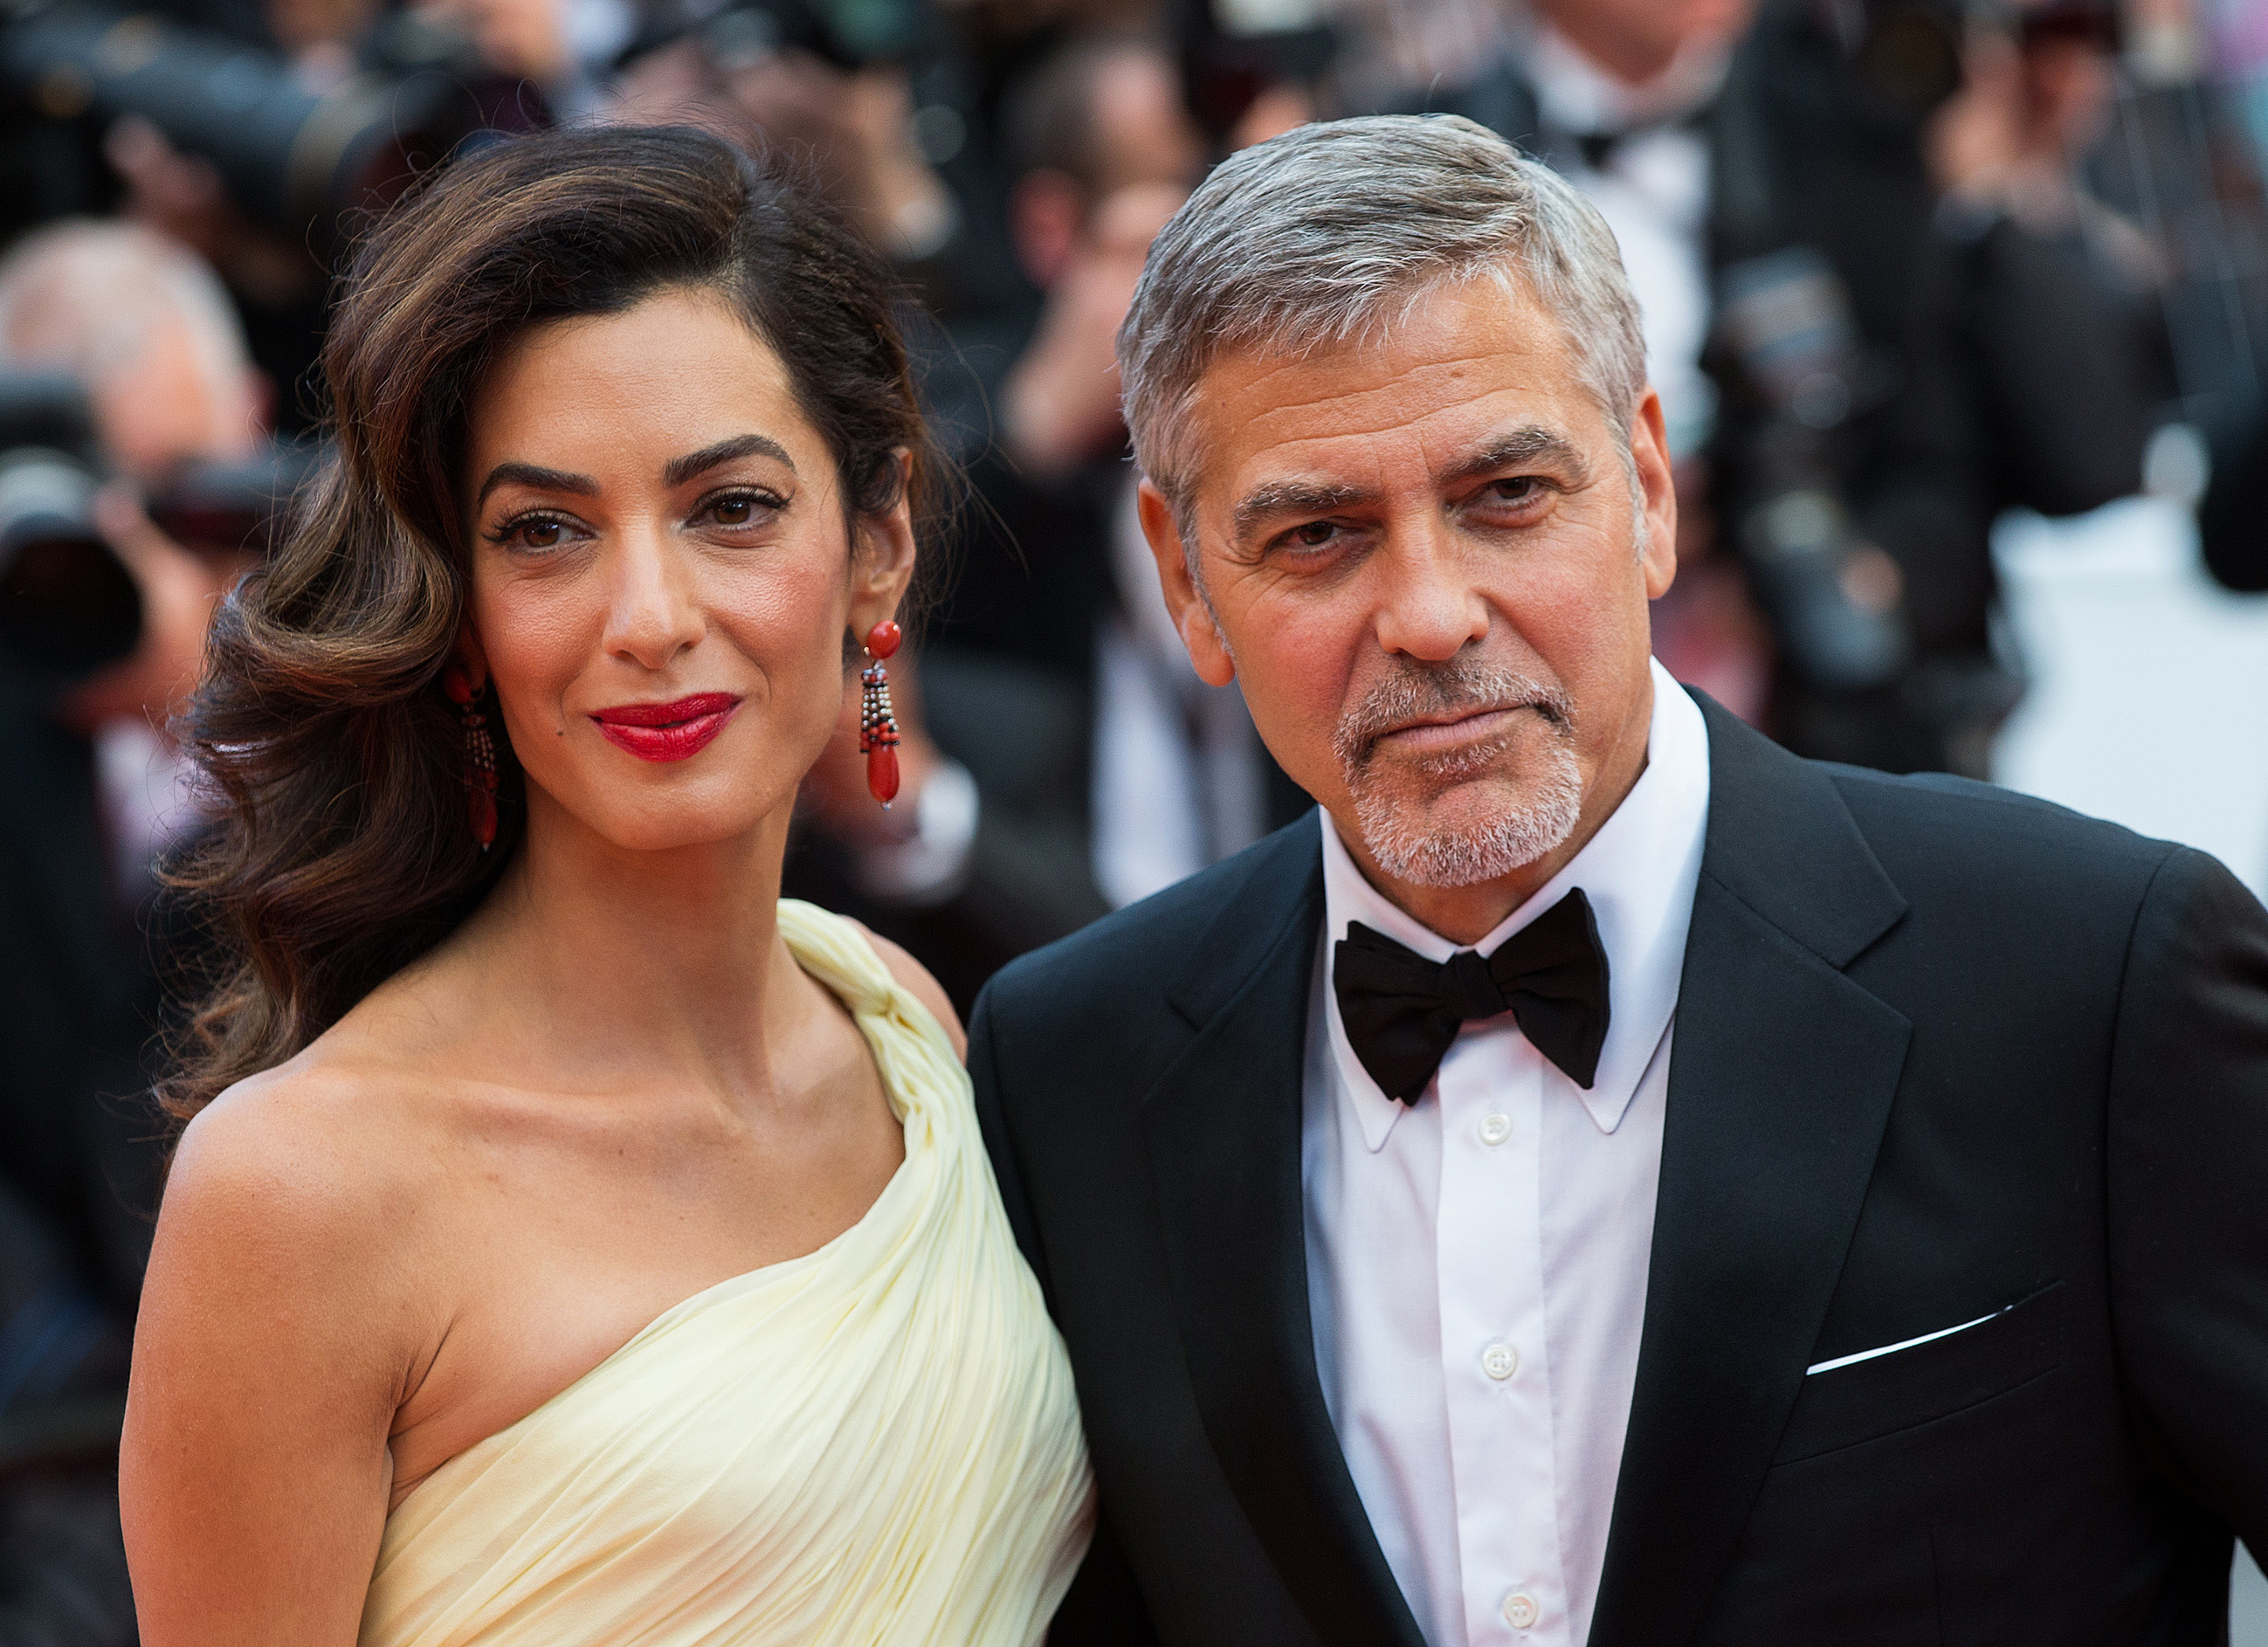 A picture of Amal Alamuddin and George Clooney together at an event.